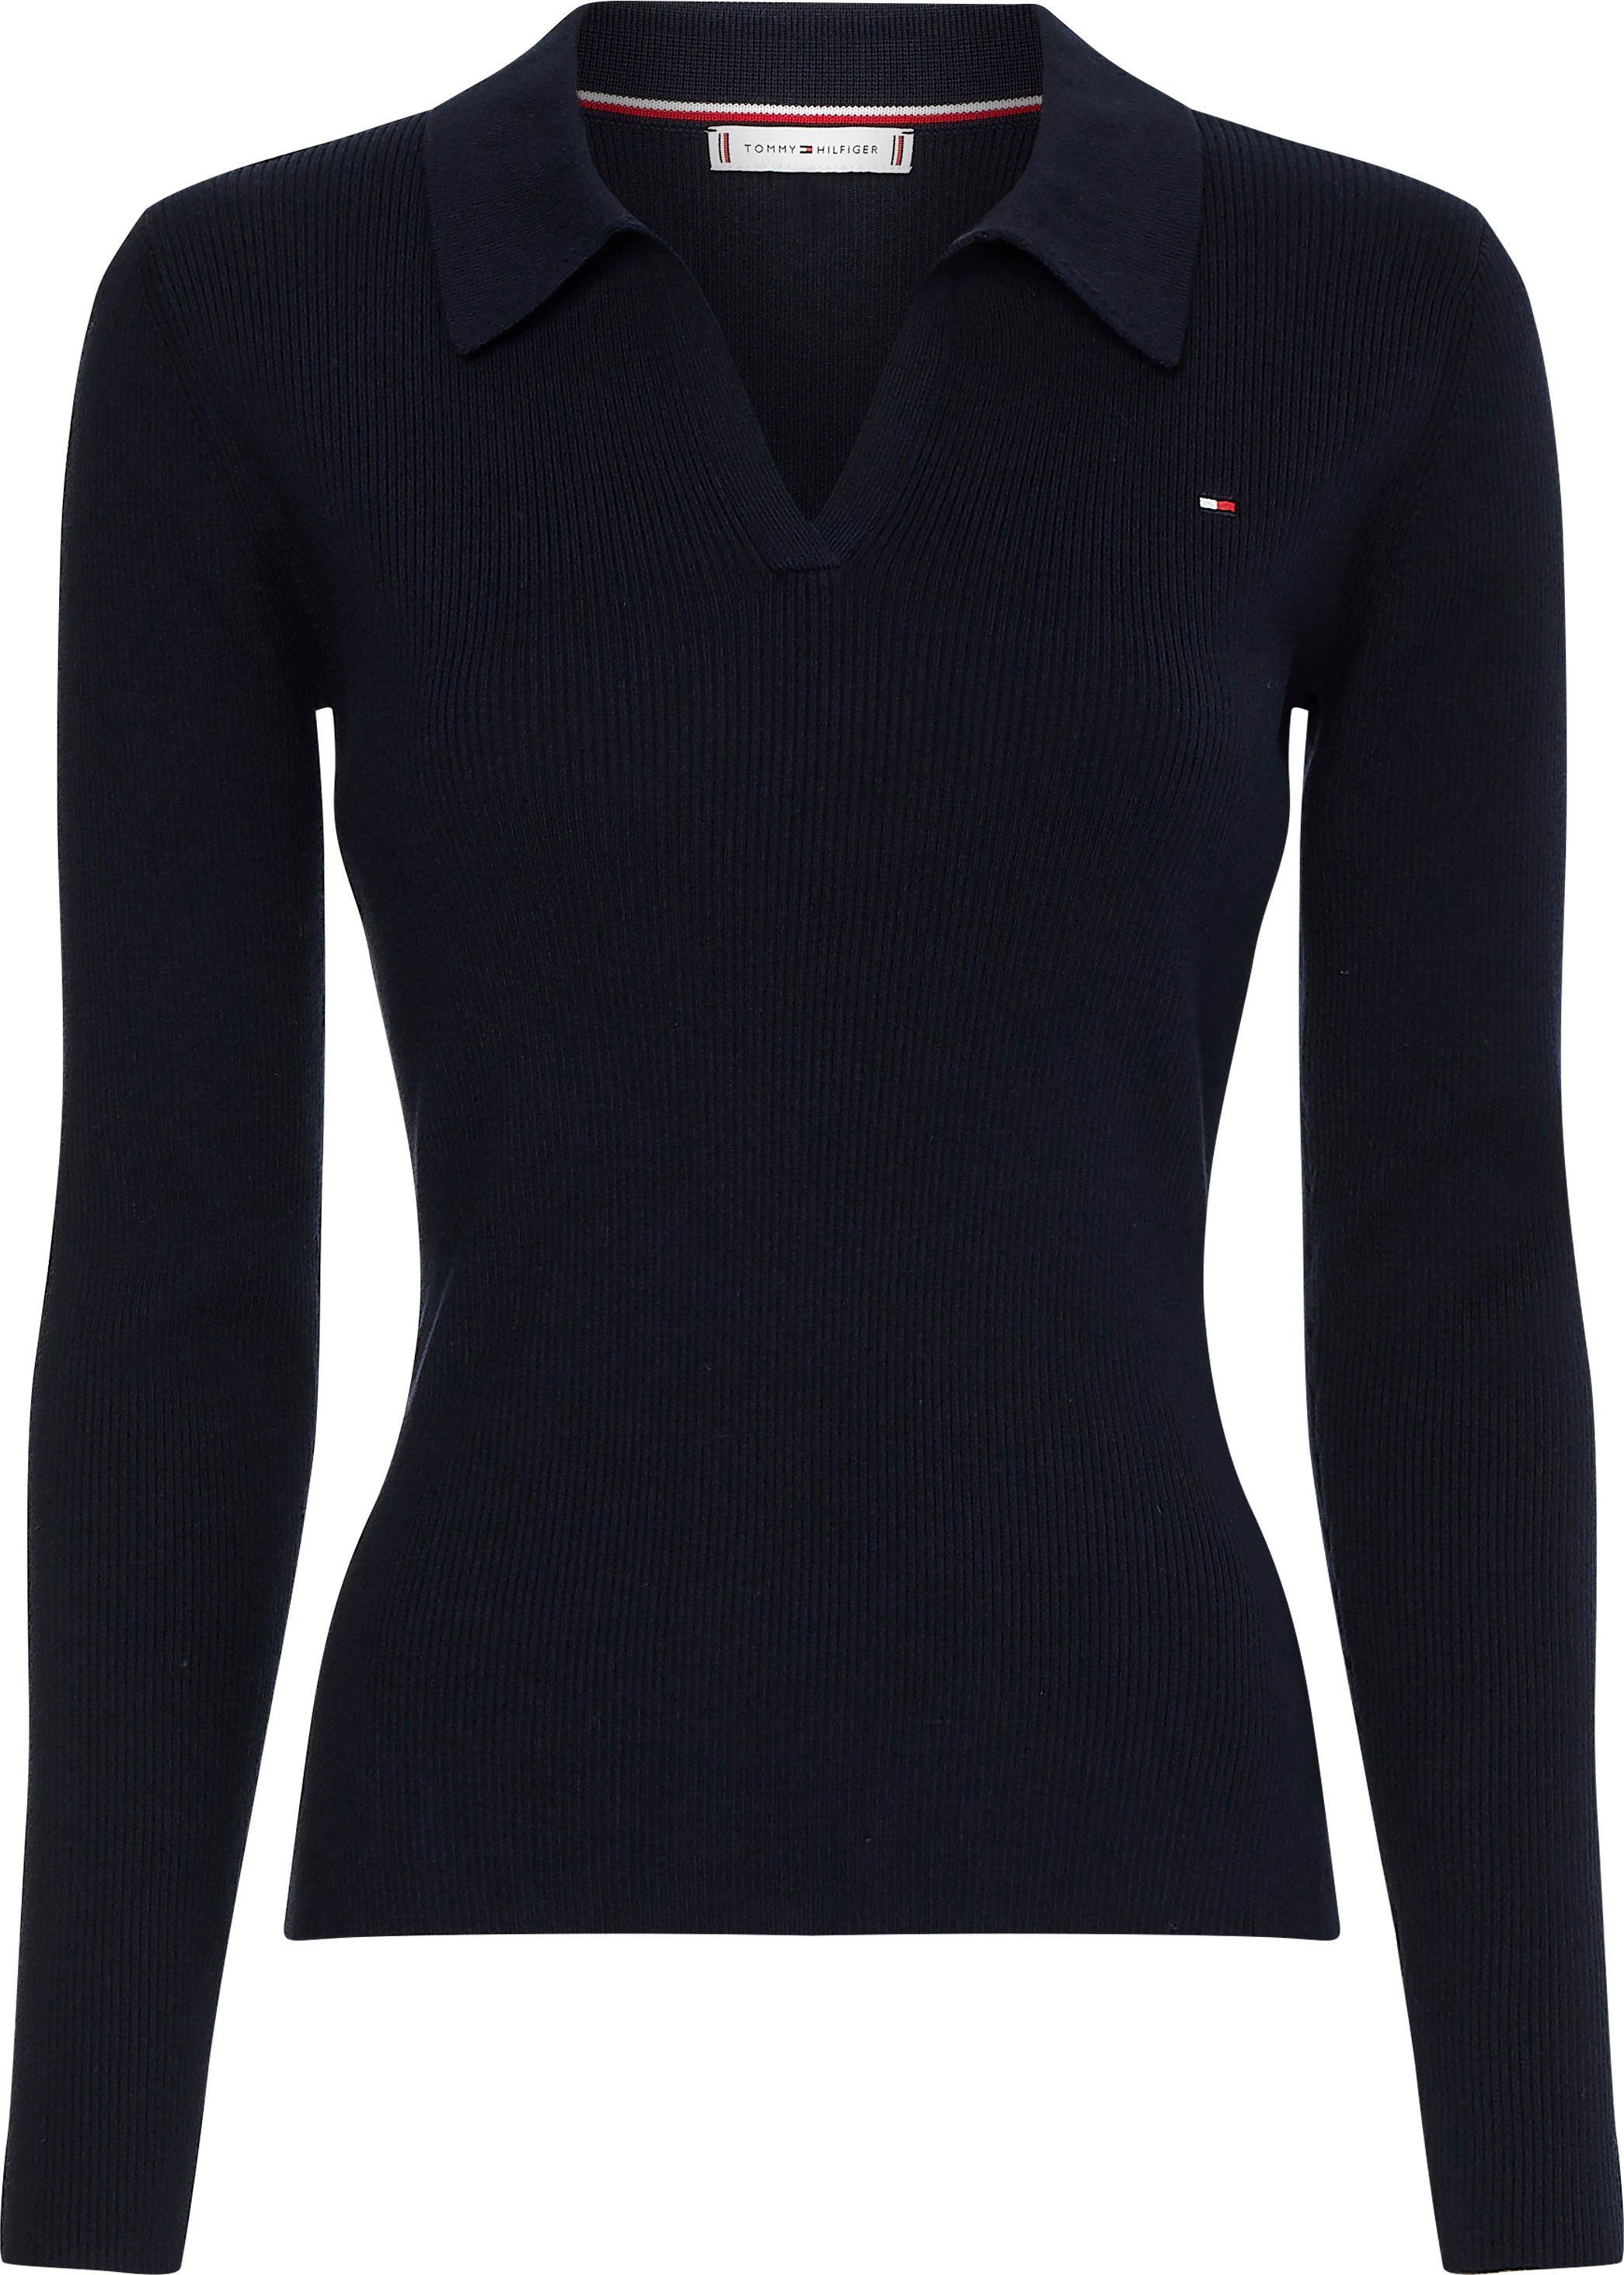 Tommy Hilfiger Curve Polokragenpullover »CRV ORG CO SLIM OPEN POLO-NK SWT«  angenehme Rippstrickware online kaufen | OTTO